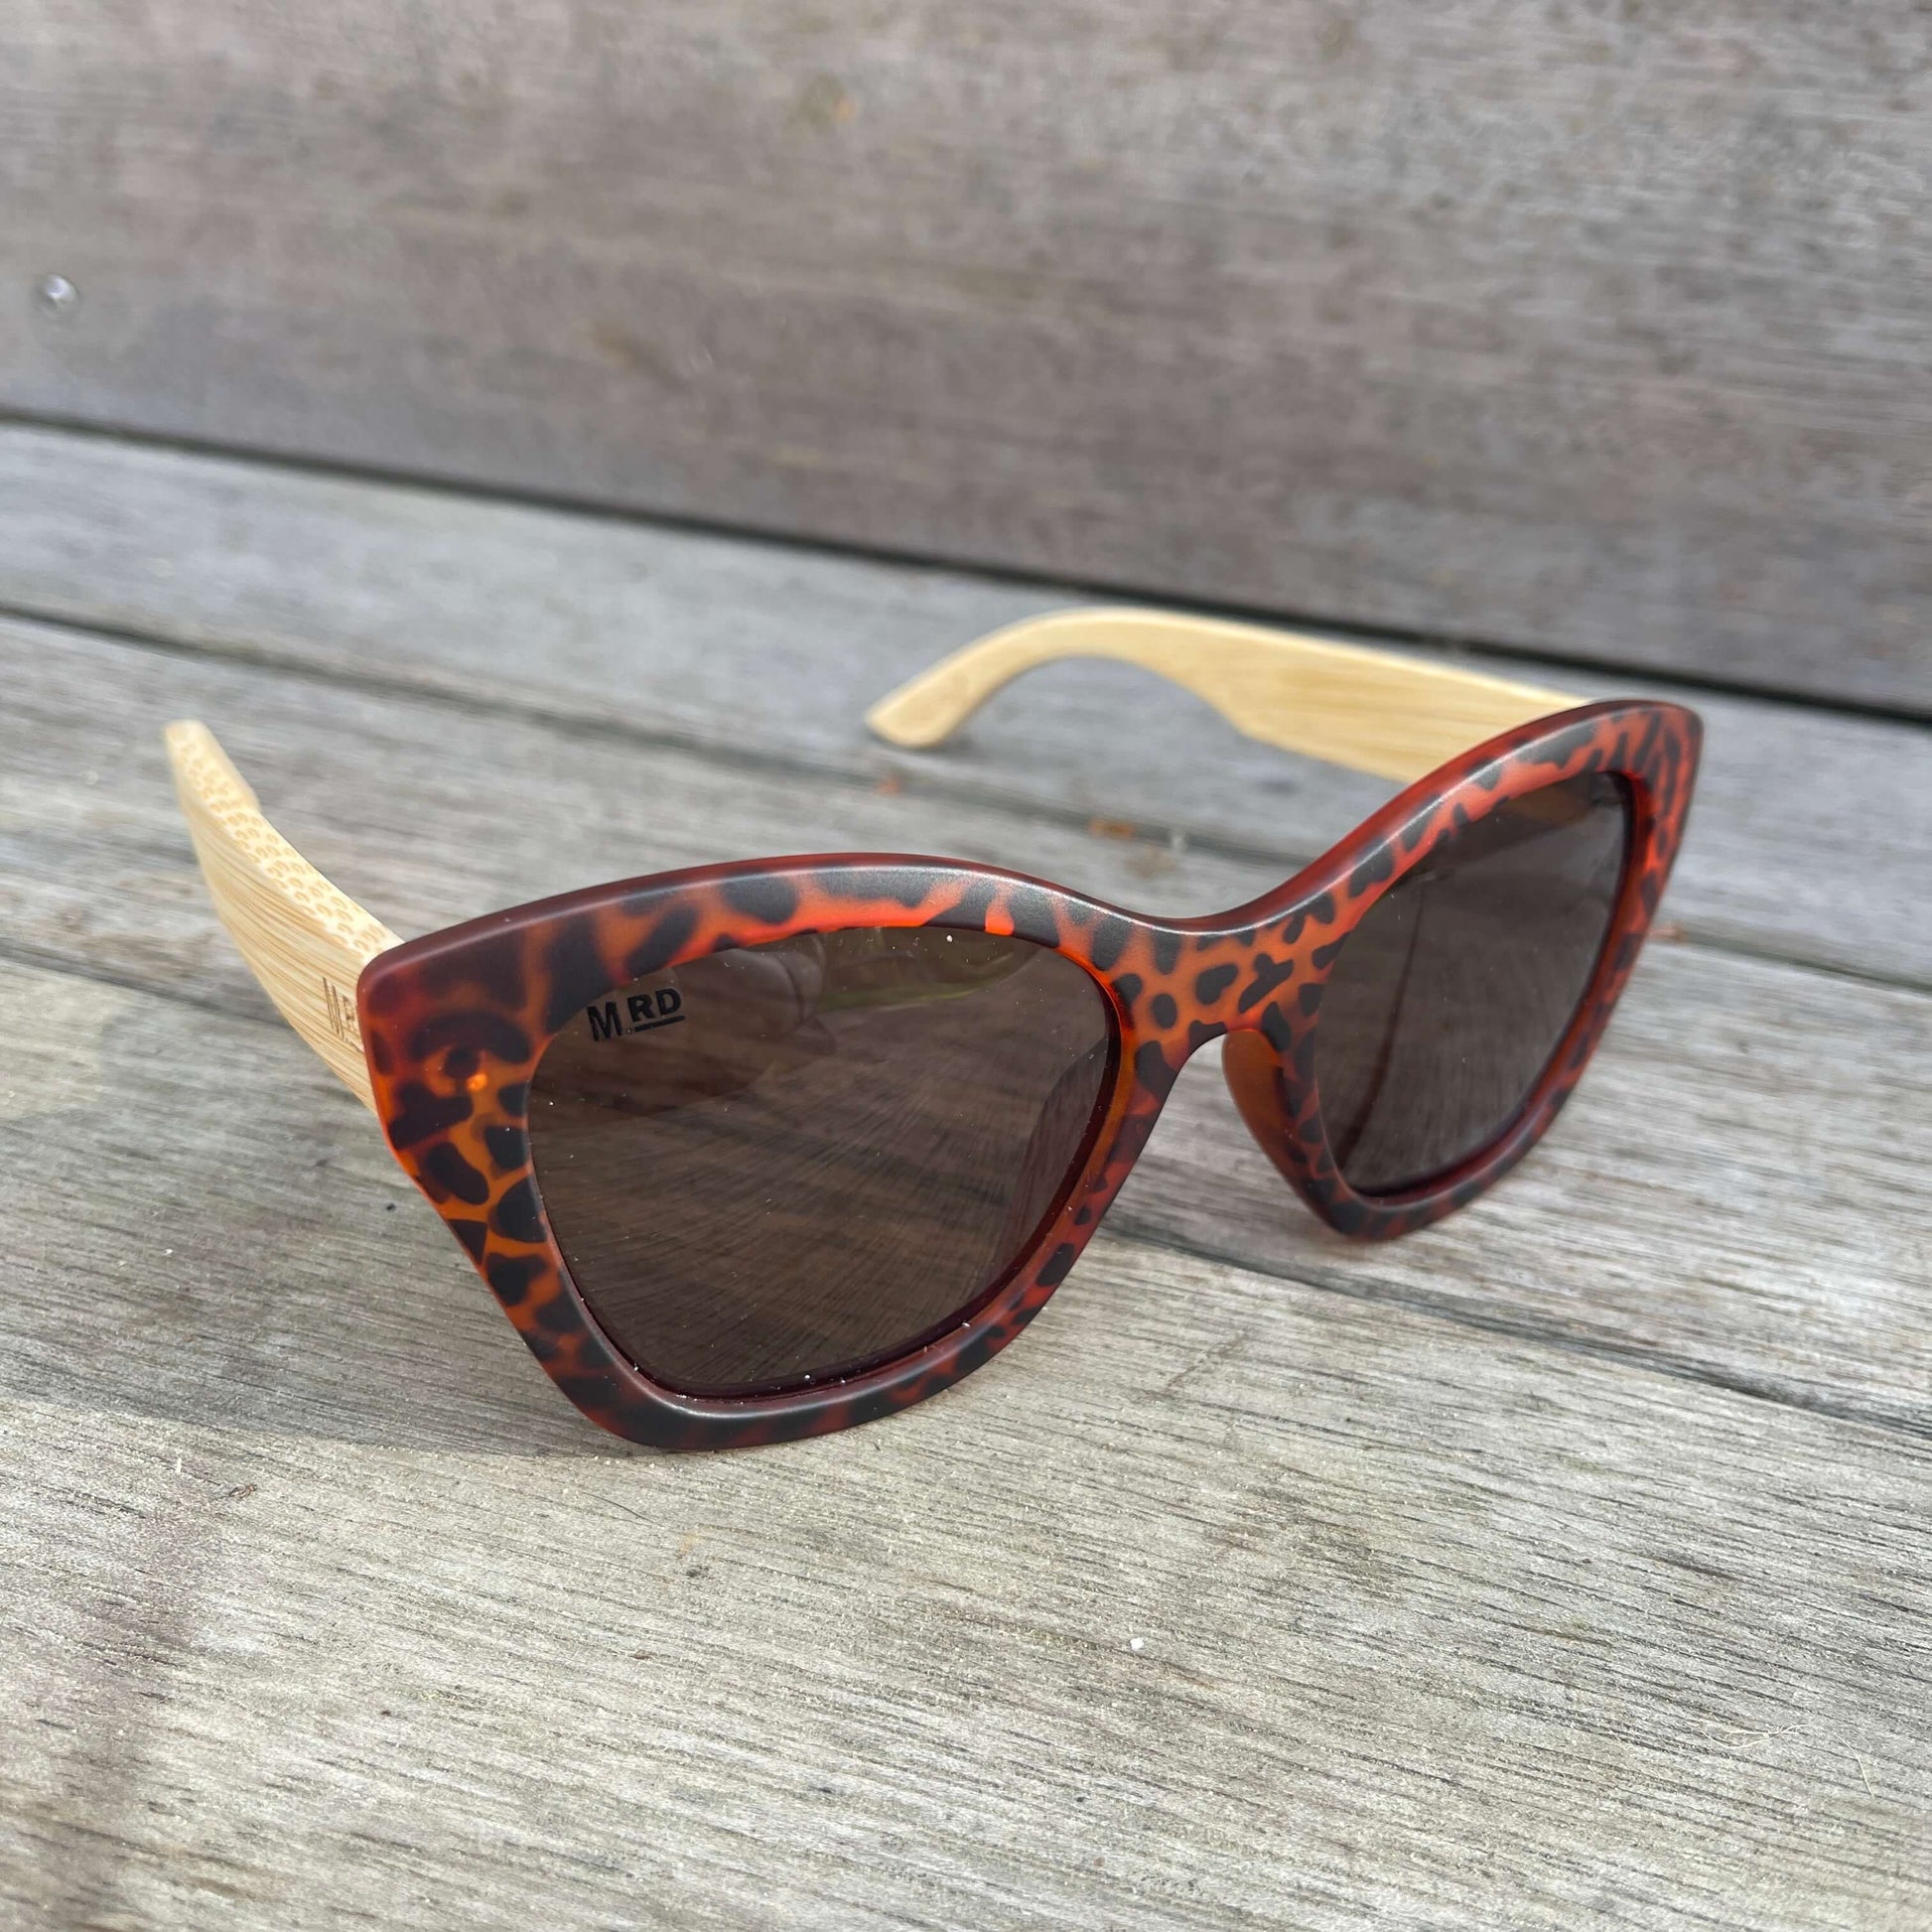 Womens sunglasses with tortoiseshell frame and bamboo arms.